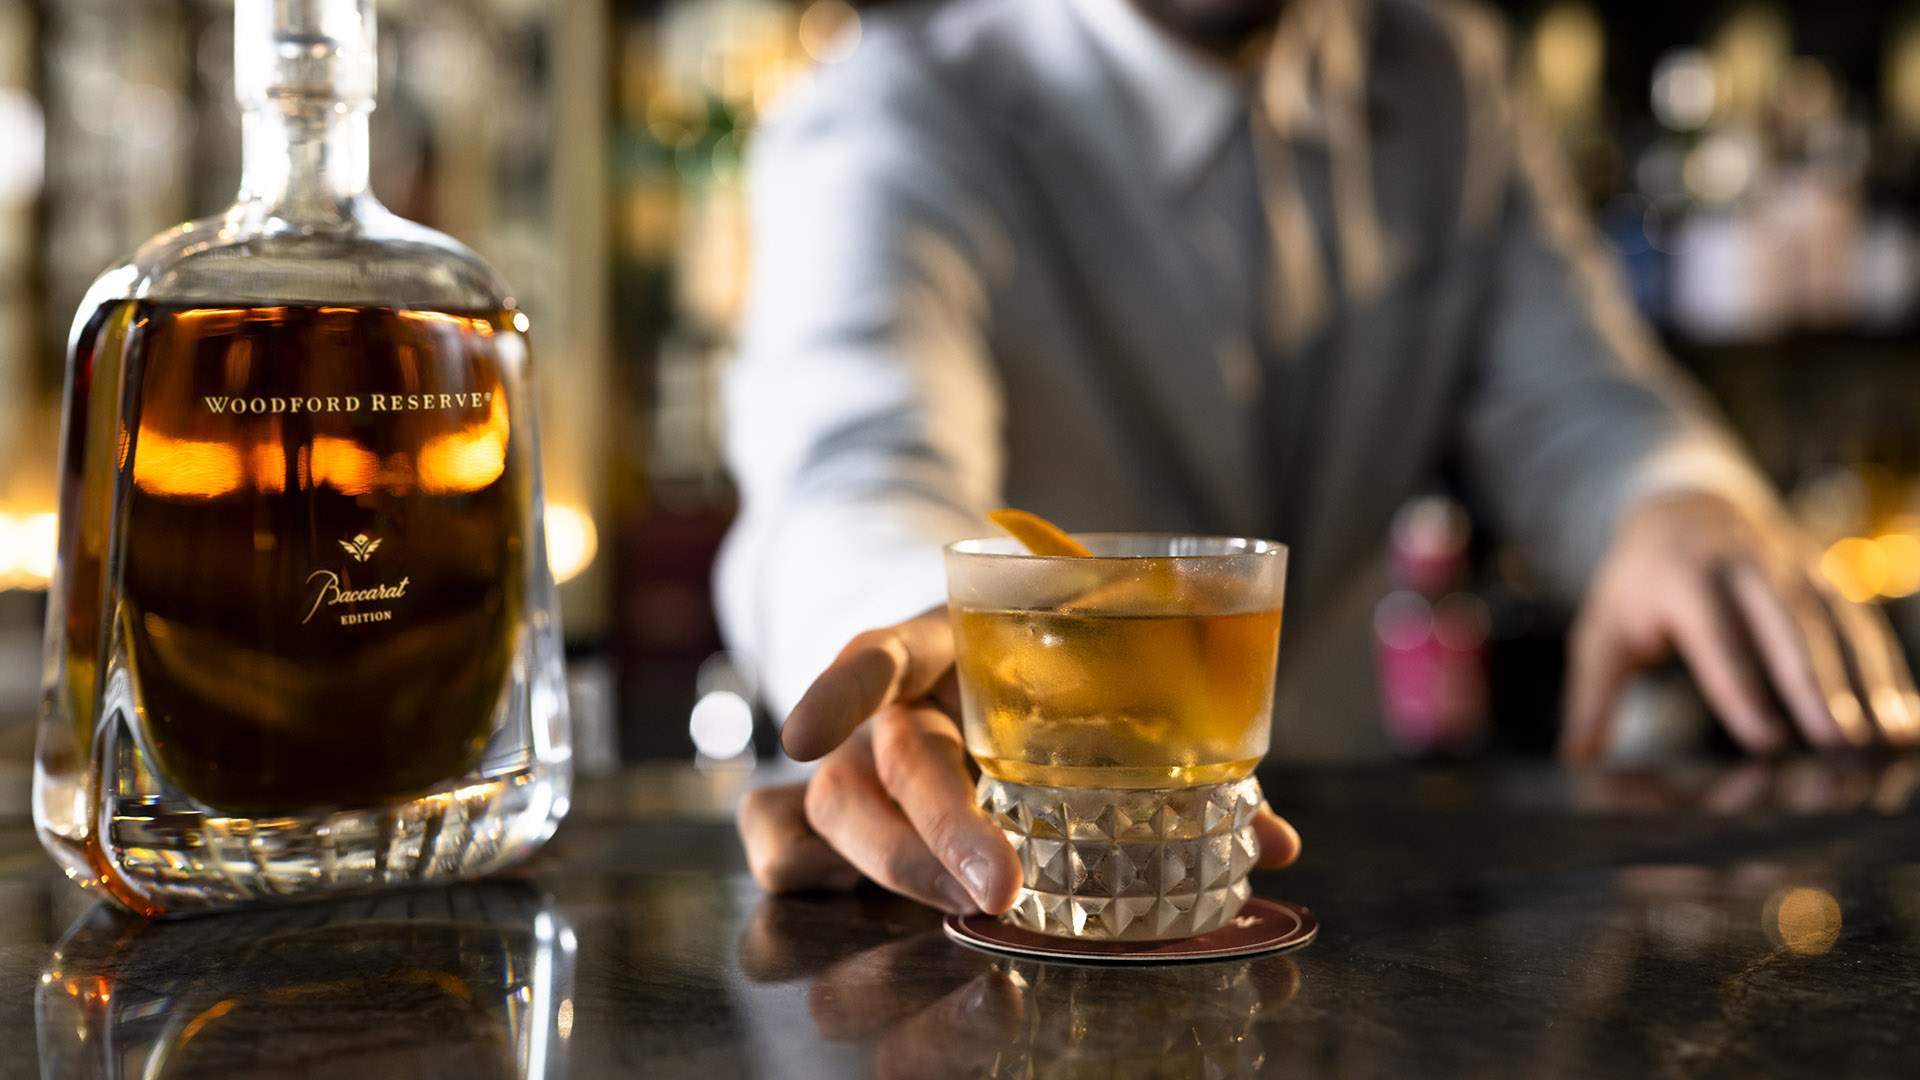 Two Aussie Bars Are Doing $15,000 Gold-Infused Old Fashioneds If You're After a Ridiculously Expensive Drink